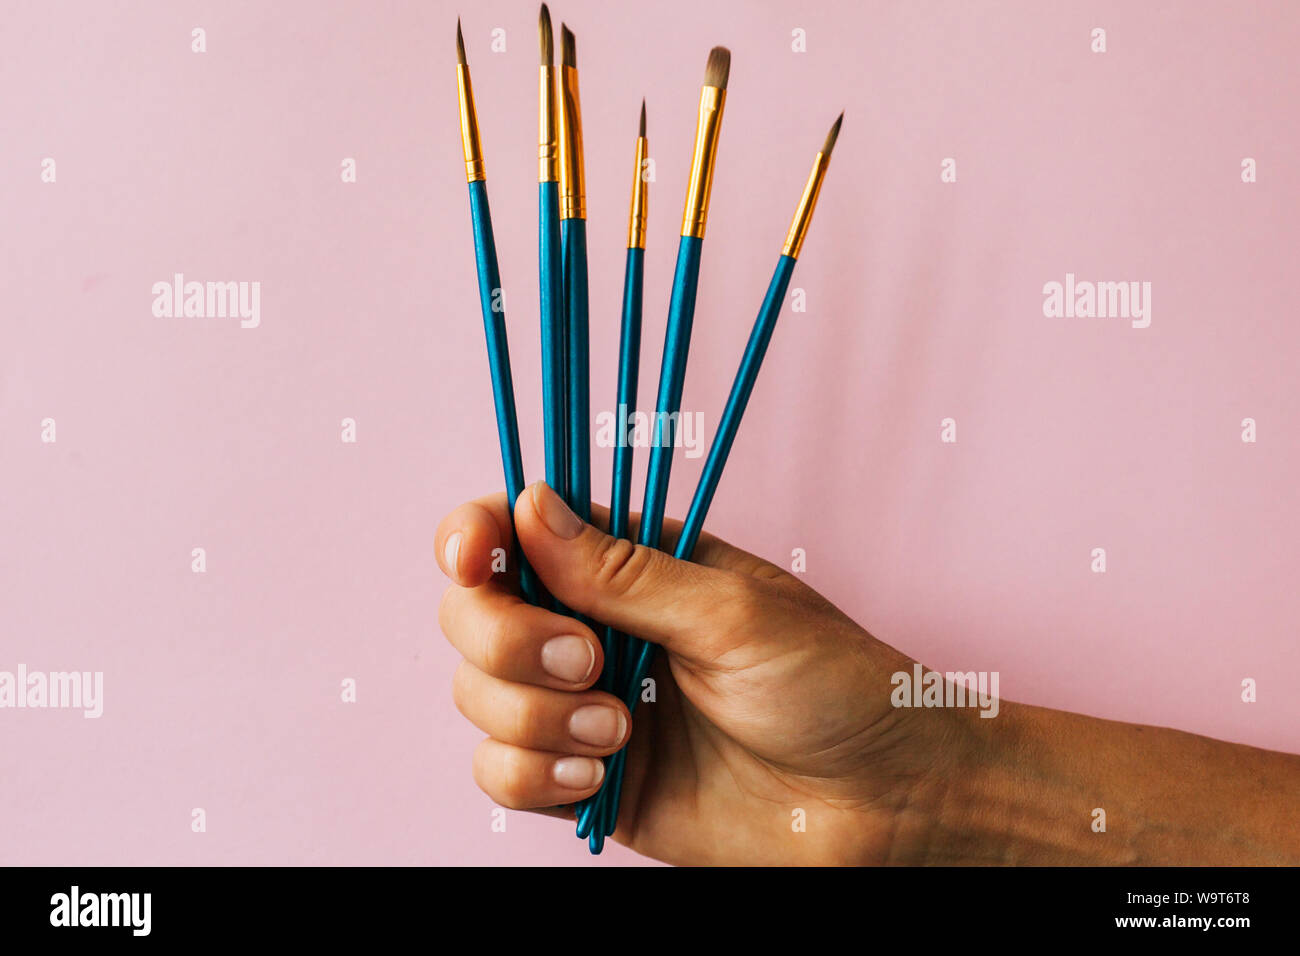 https://c8.alamy.com/comp/W9T6T8/hand-holds-paint-brushes-on-the-pink-background-W9T6T8.jpg